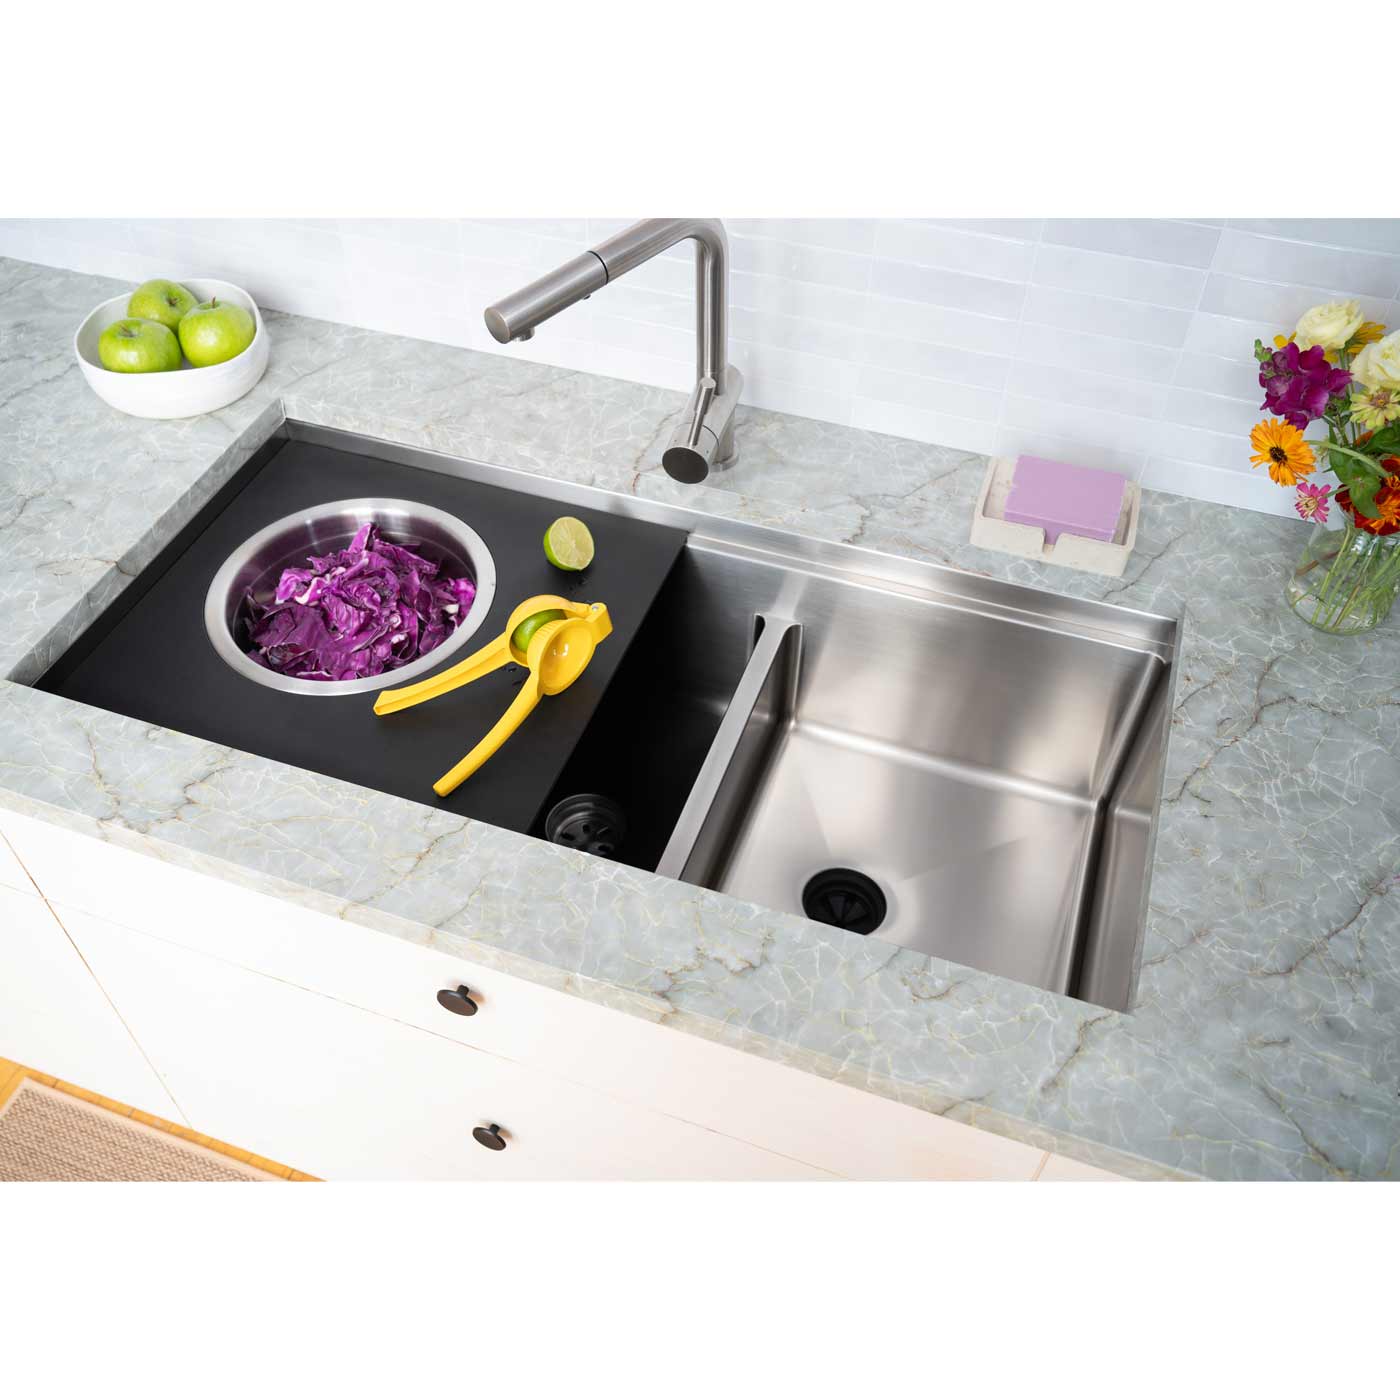 39 inch dual basin workstation sink made with 16 gauge type 304 stainless steel and low divide